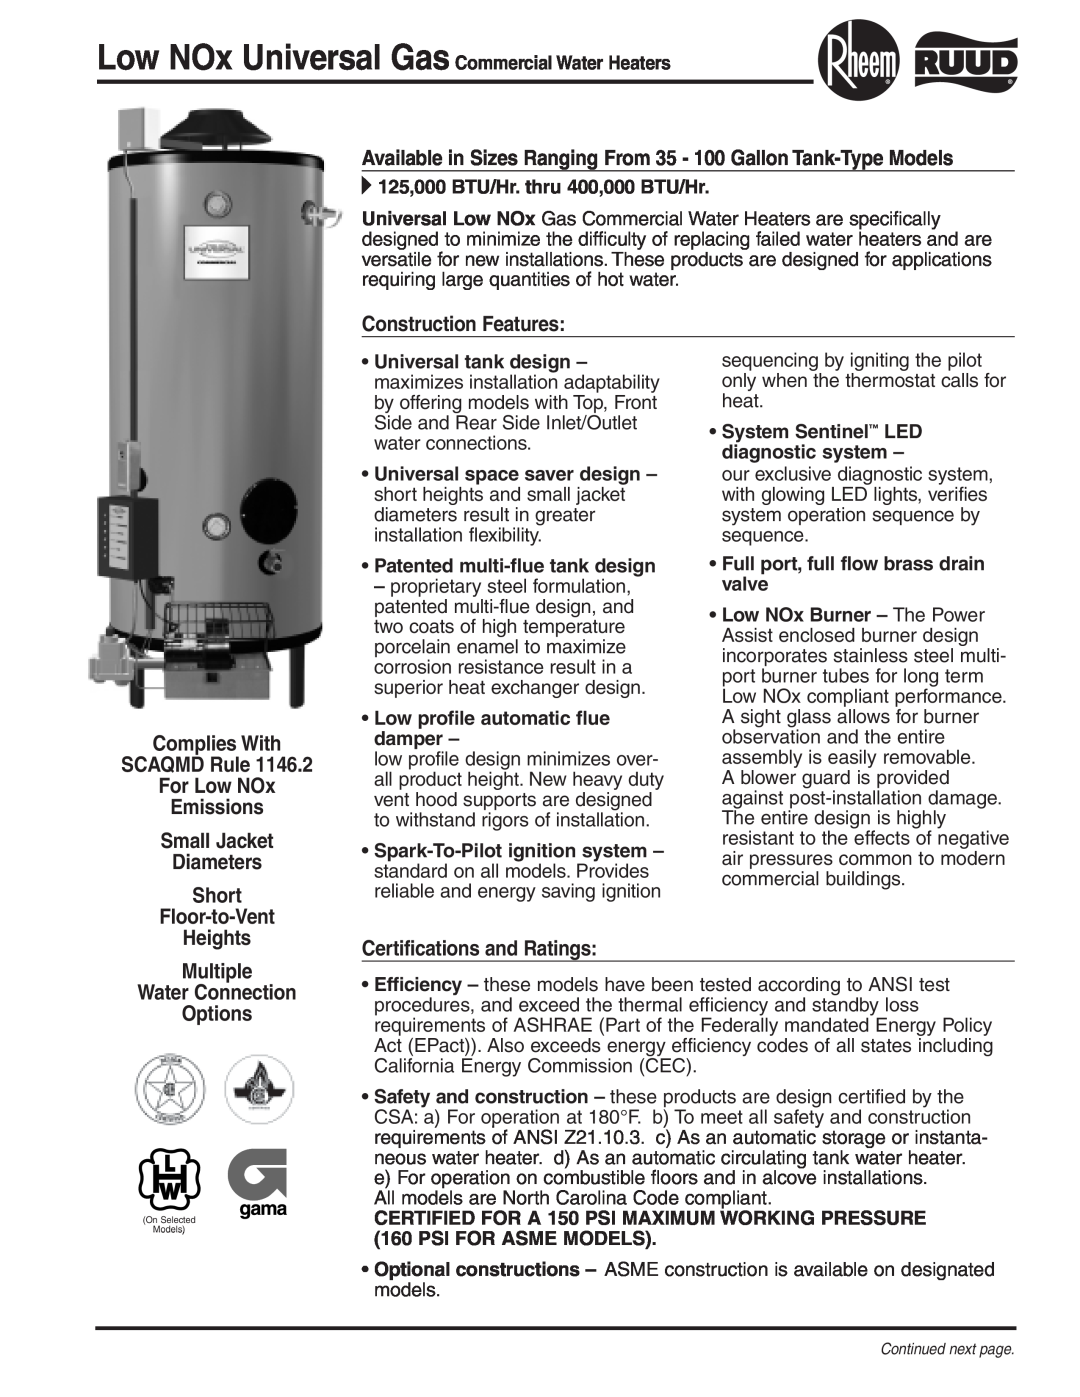 Rheem Low NOX manual Available in Sizes Ranging From 35 - 100 GallonTank-Type Models, Construction Features 